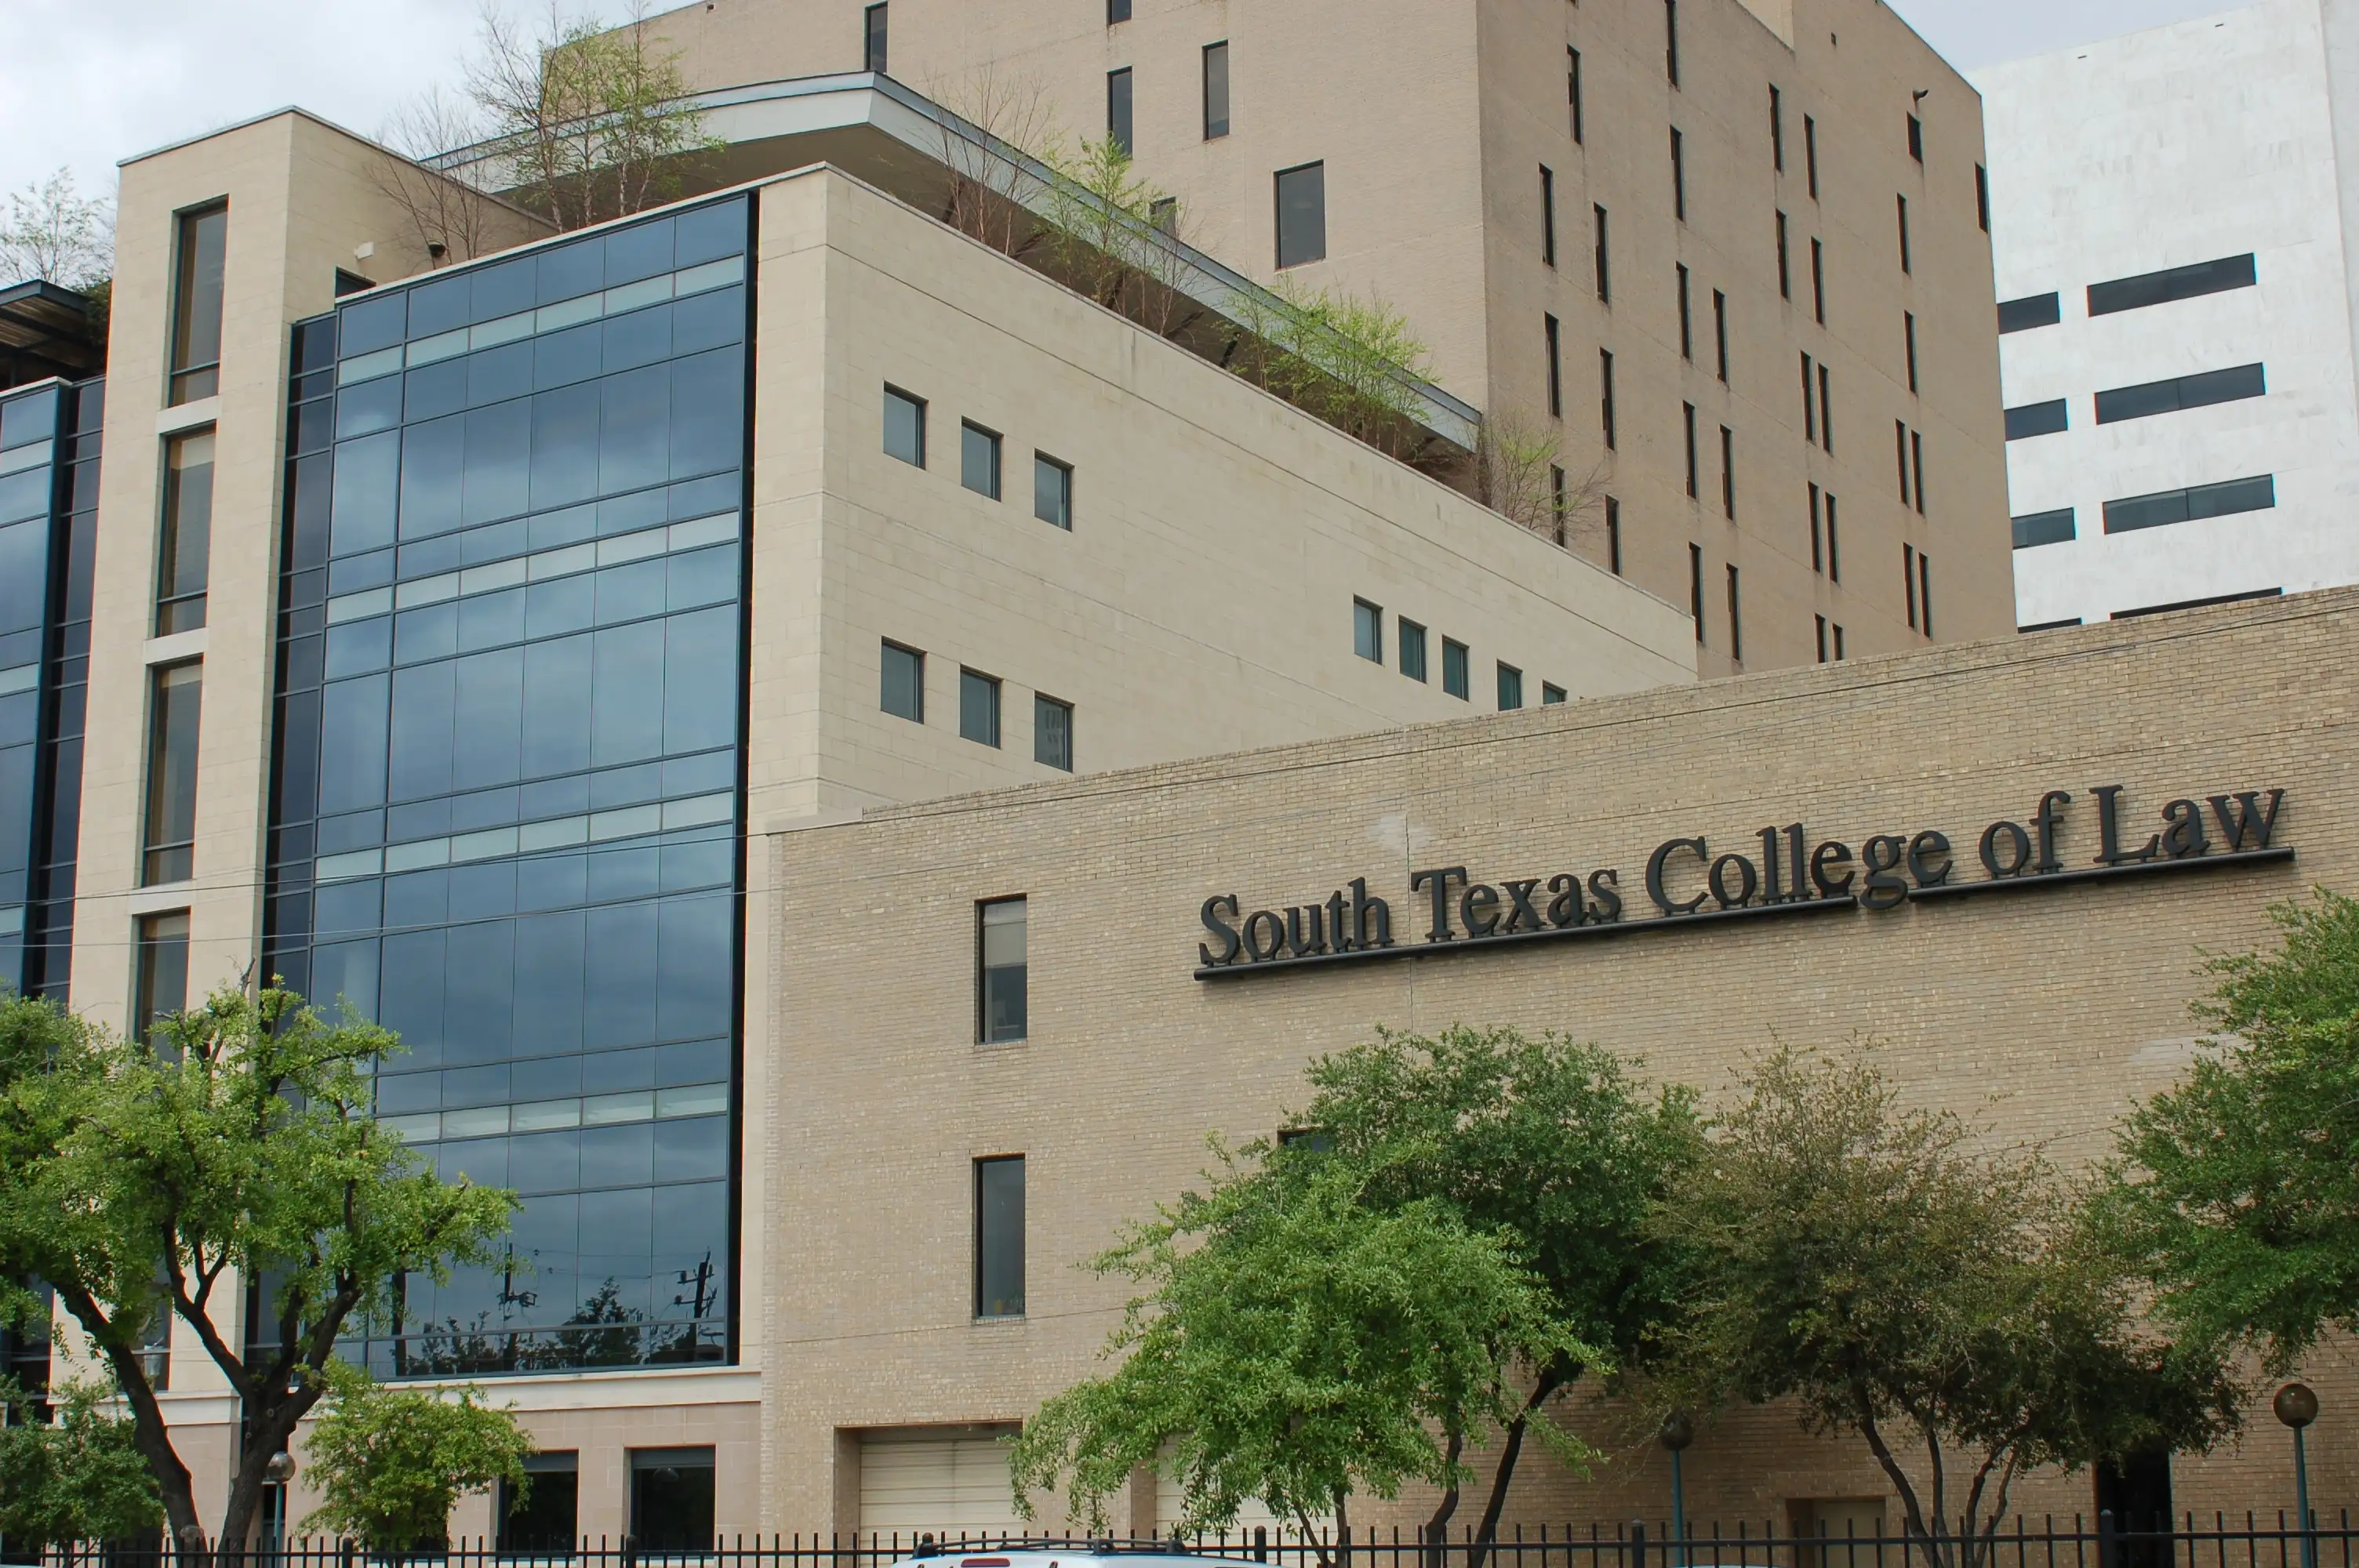 South Texas College of Law, Houston, TX